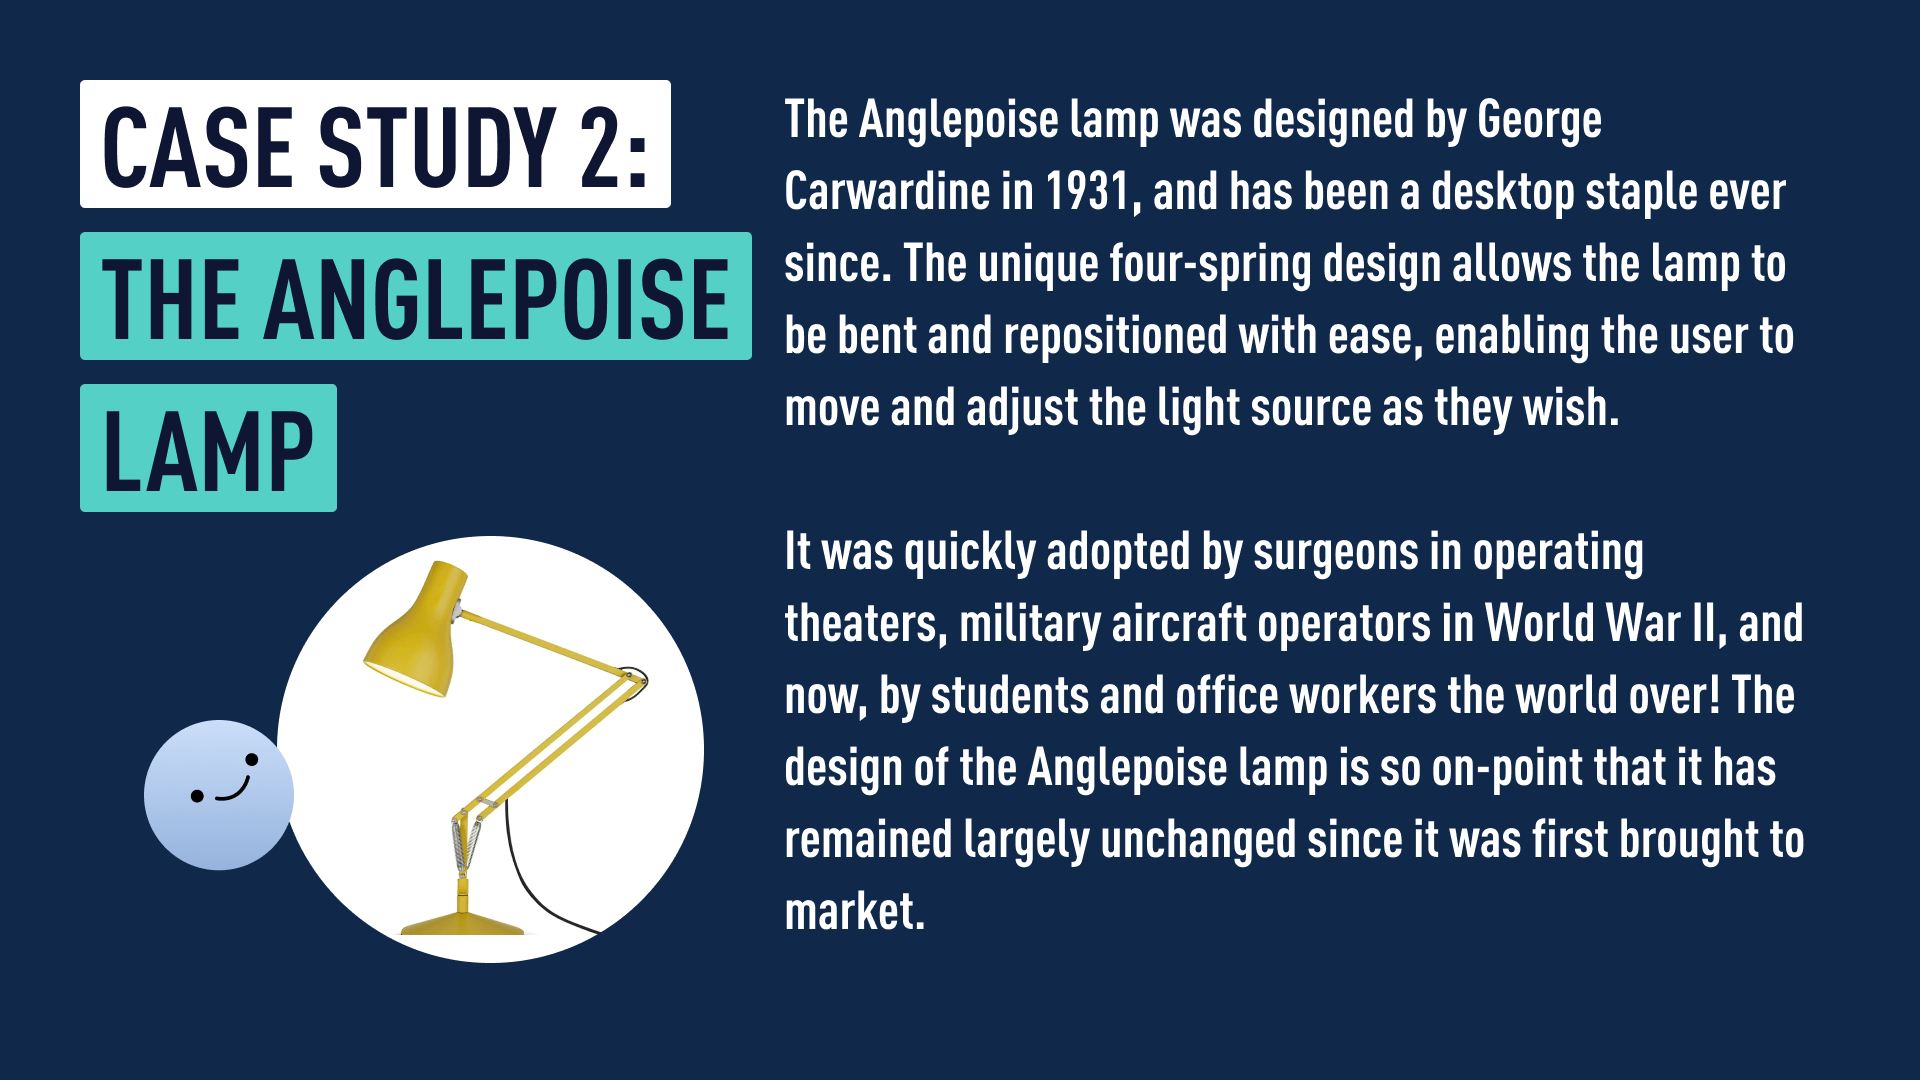 A case study about the Anglepoise Lamp - an example of good product design